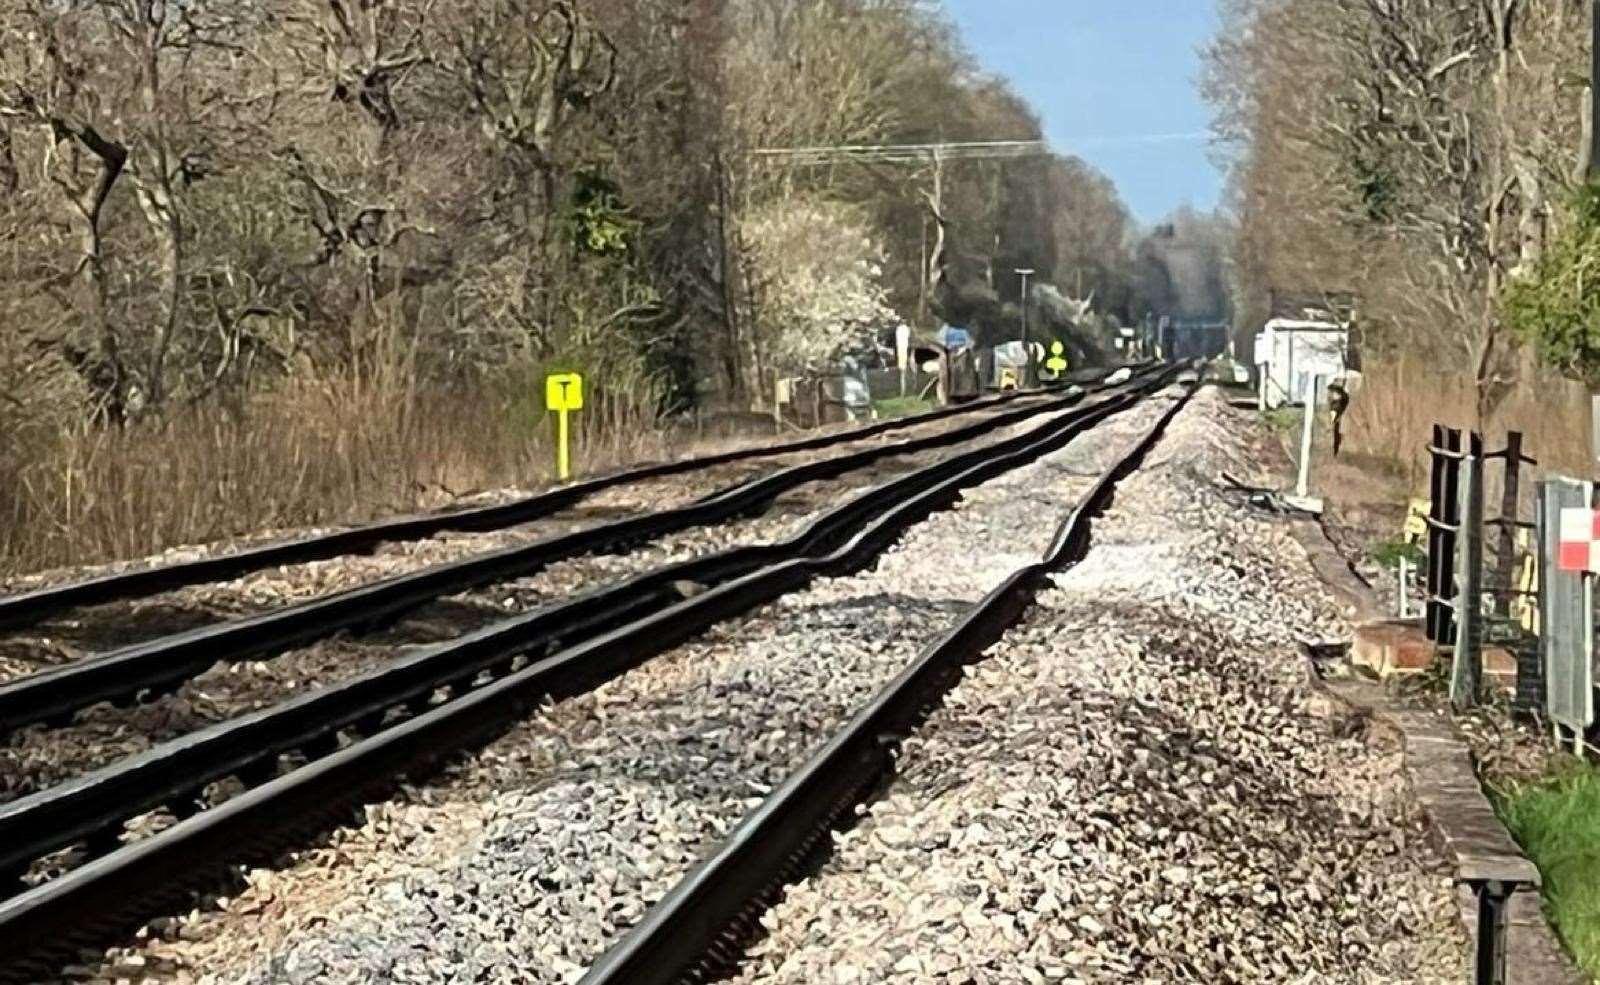 Network Rail says the track between Tonbridge and Edenbridge isn’t as level as it needs to be, so trains cannot safely run on it. Picture: @NetworkRailSE